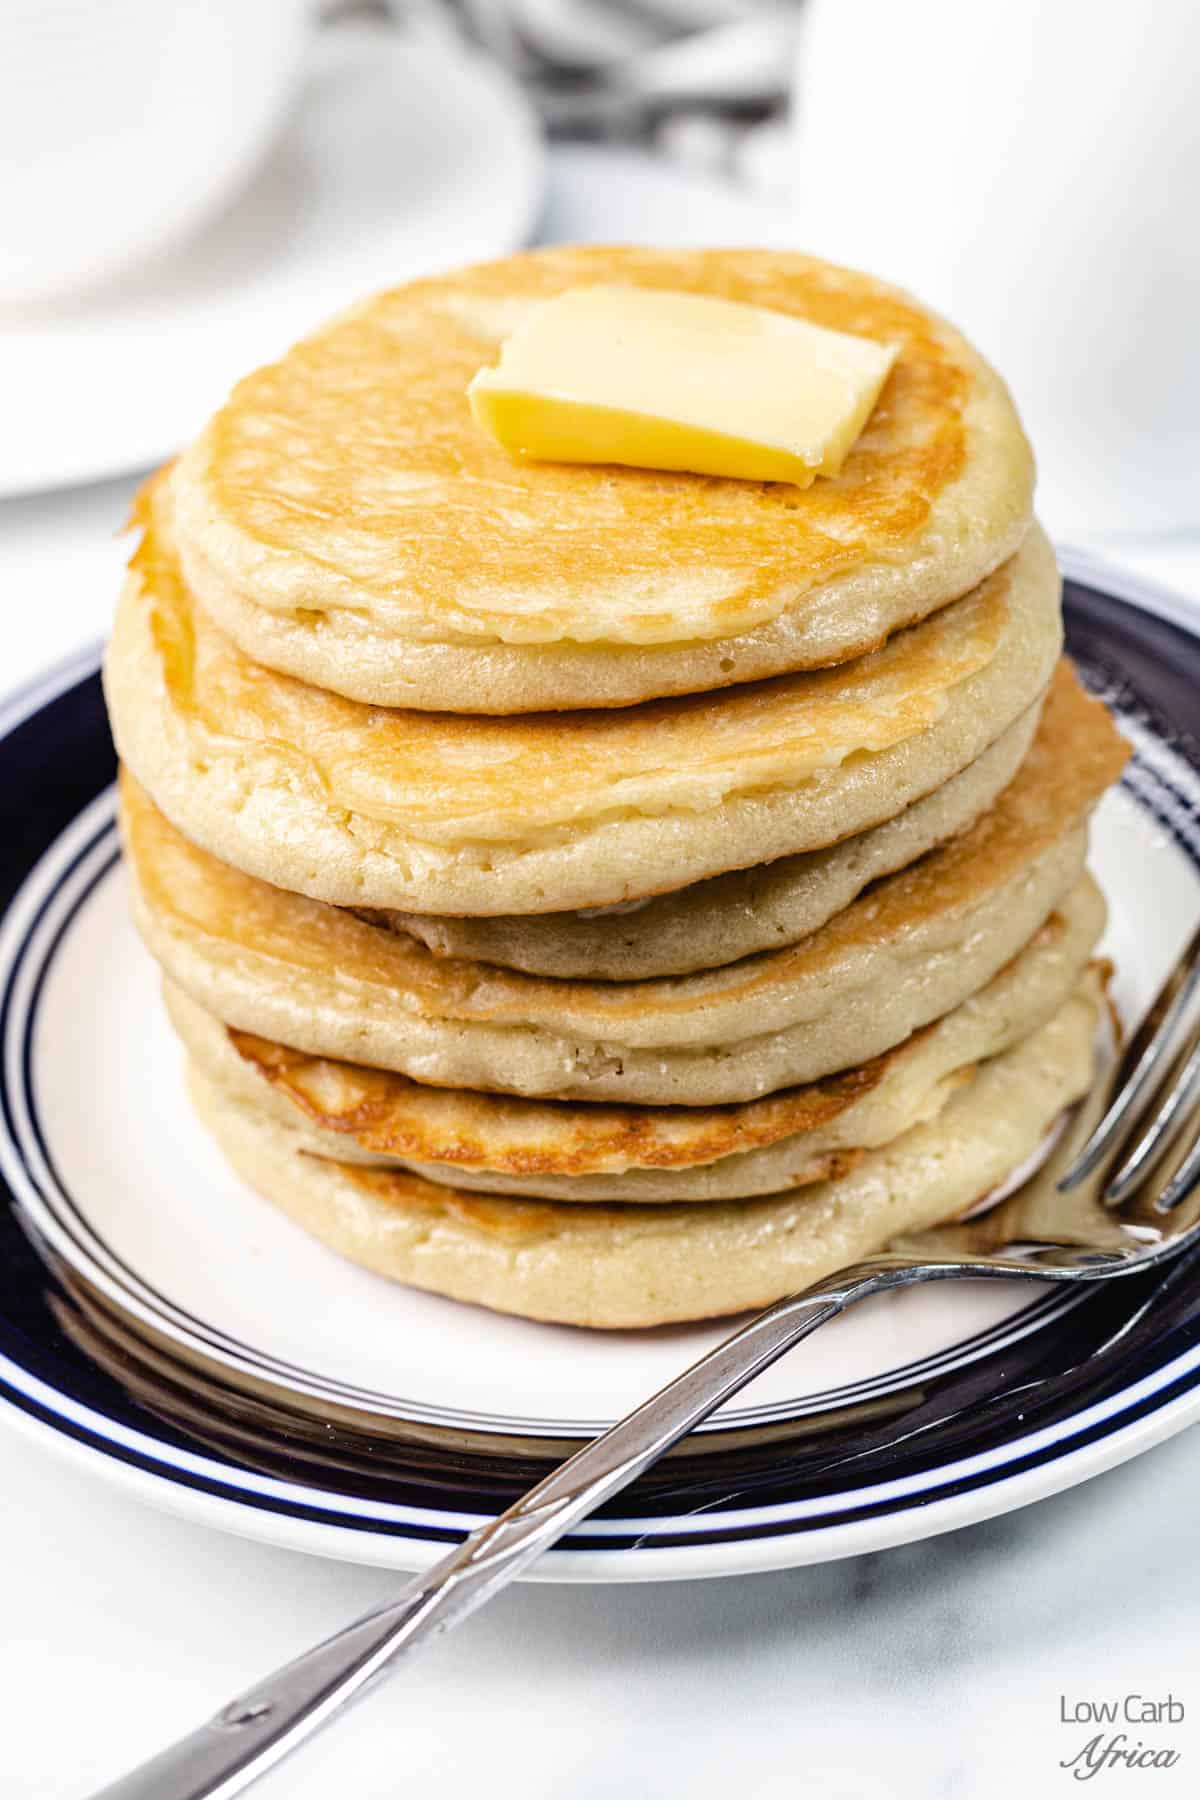 Keto pancakes served and ready to eat